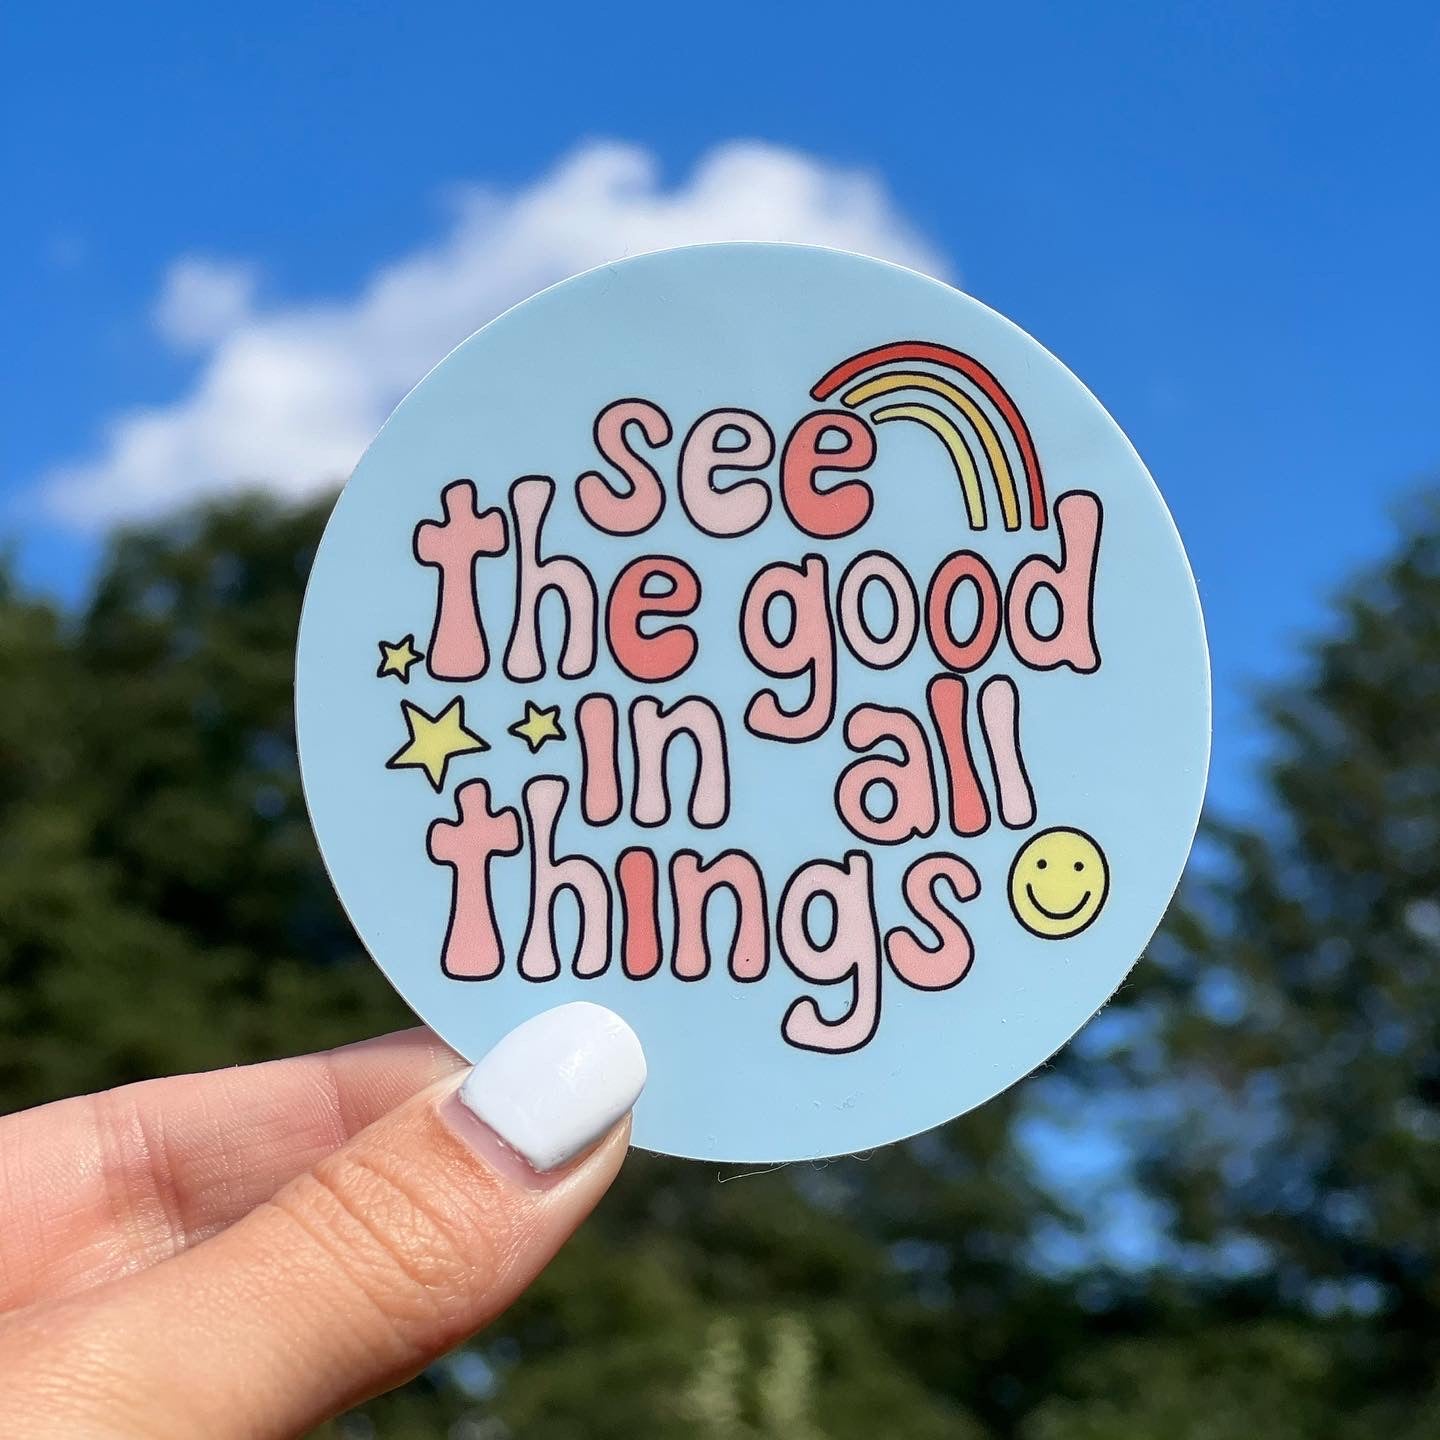 Pin on All Things Good